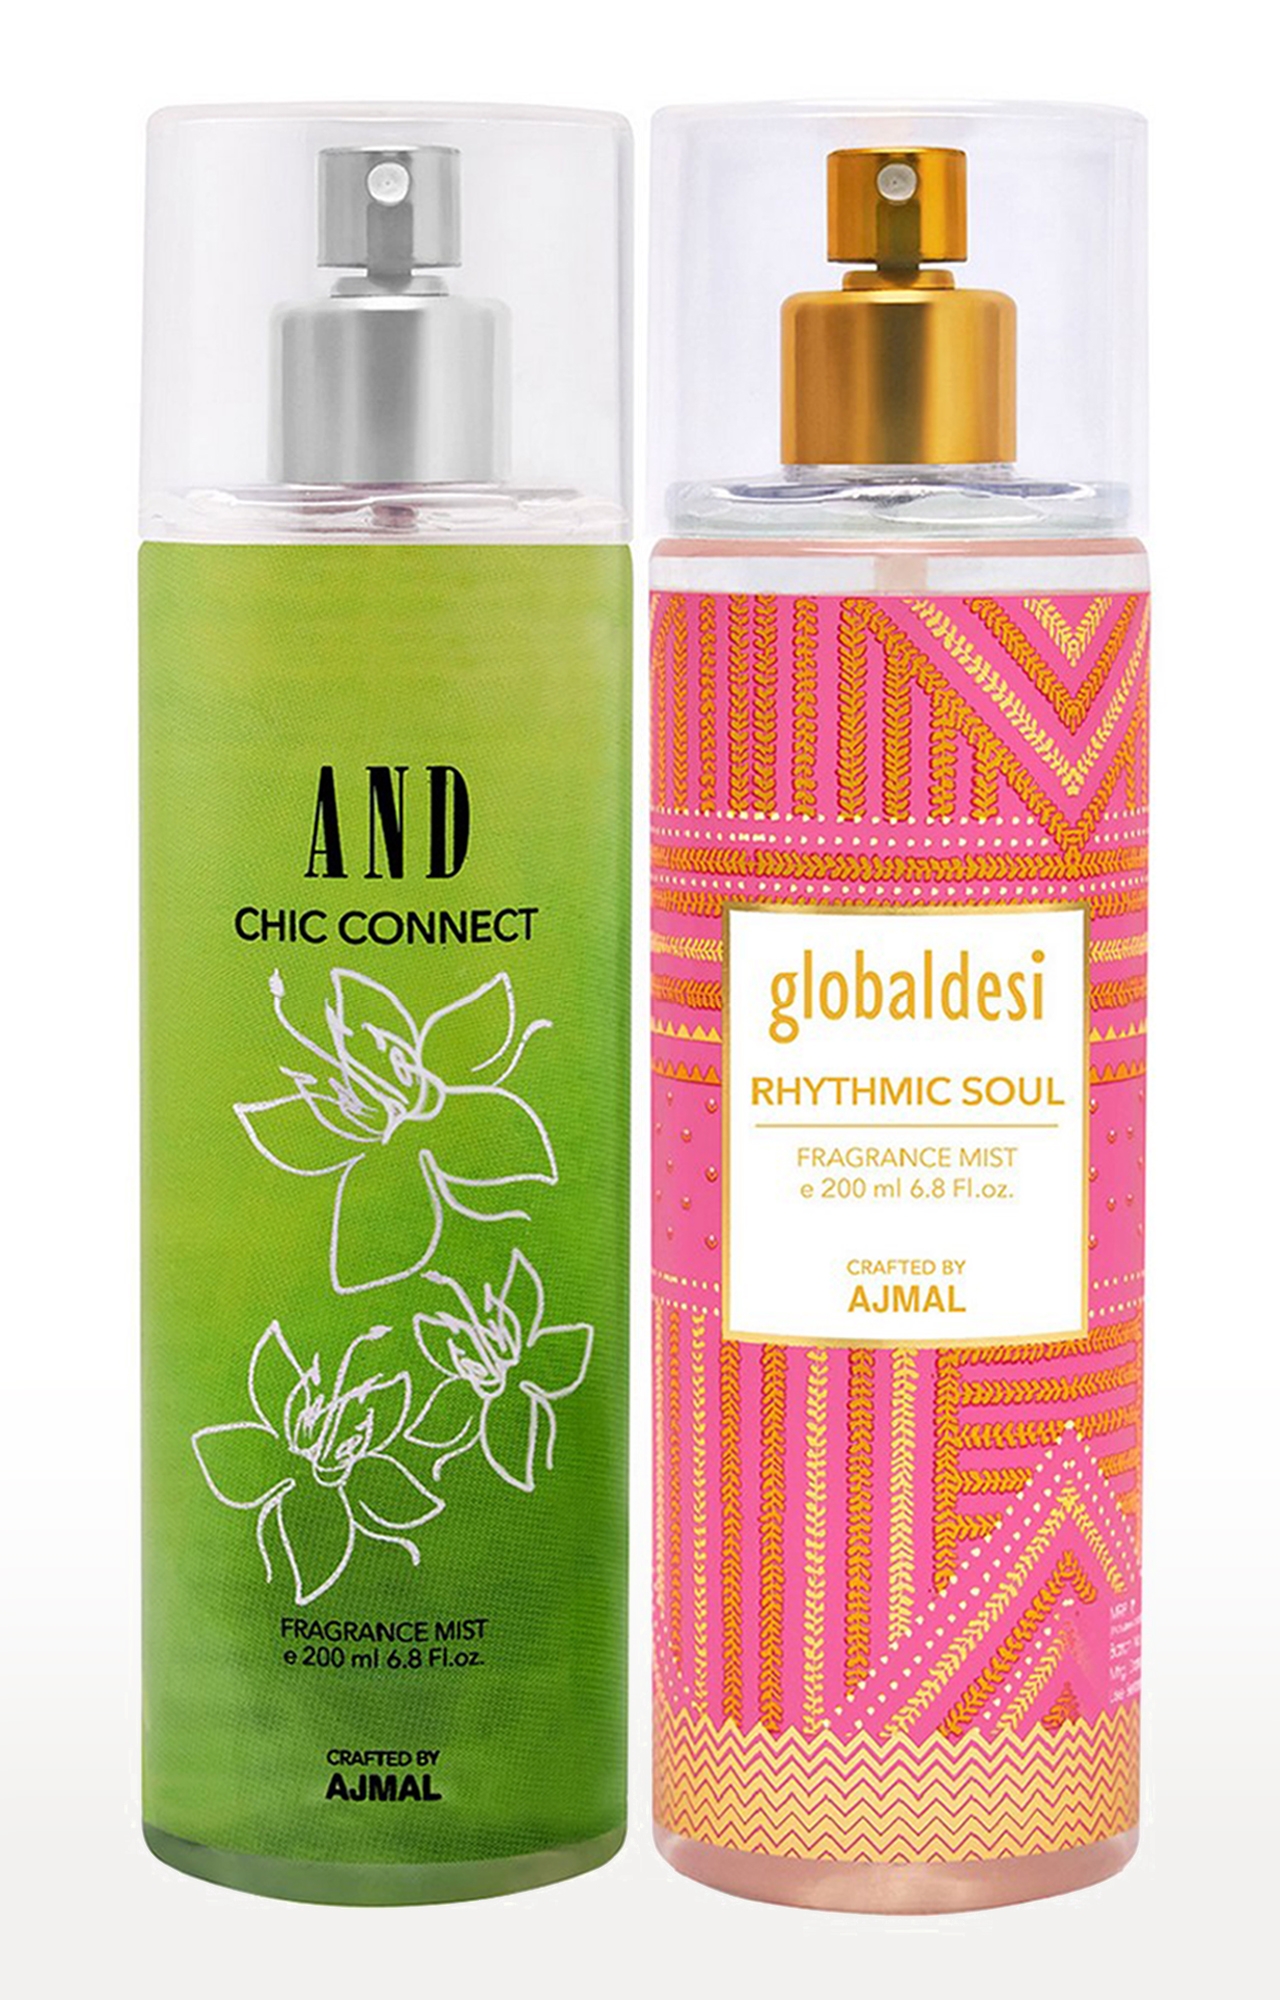 AND Crafted By Ajmal | AND Chic Connect Body Mist 200ML & Global Desi Rhythmic Soul Body Mist 200ML 